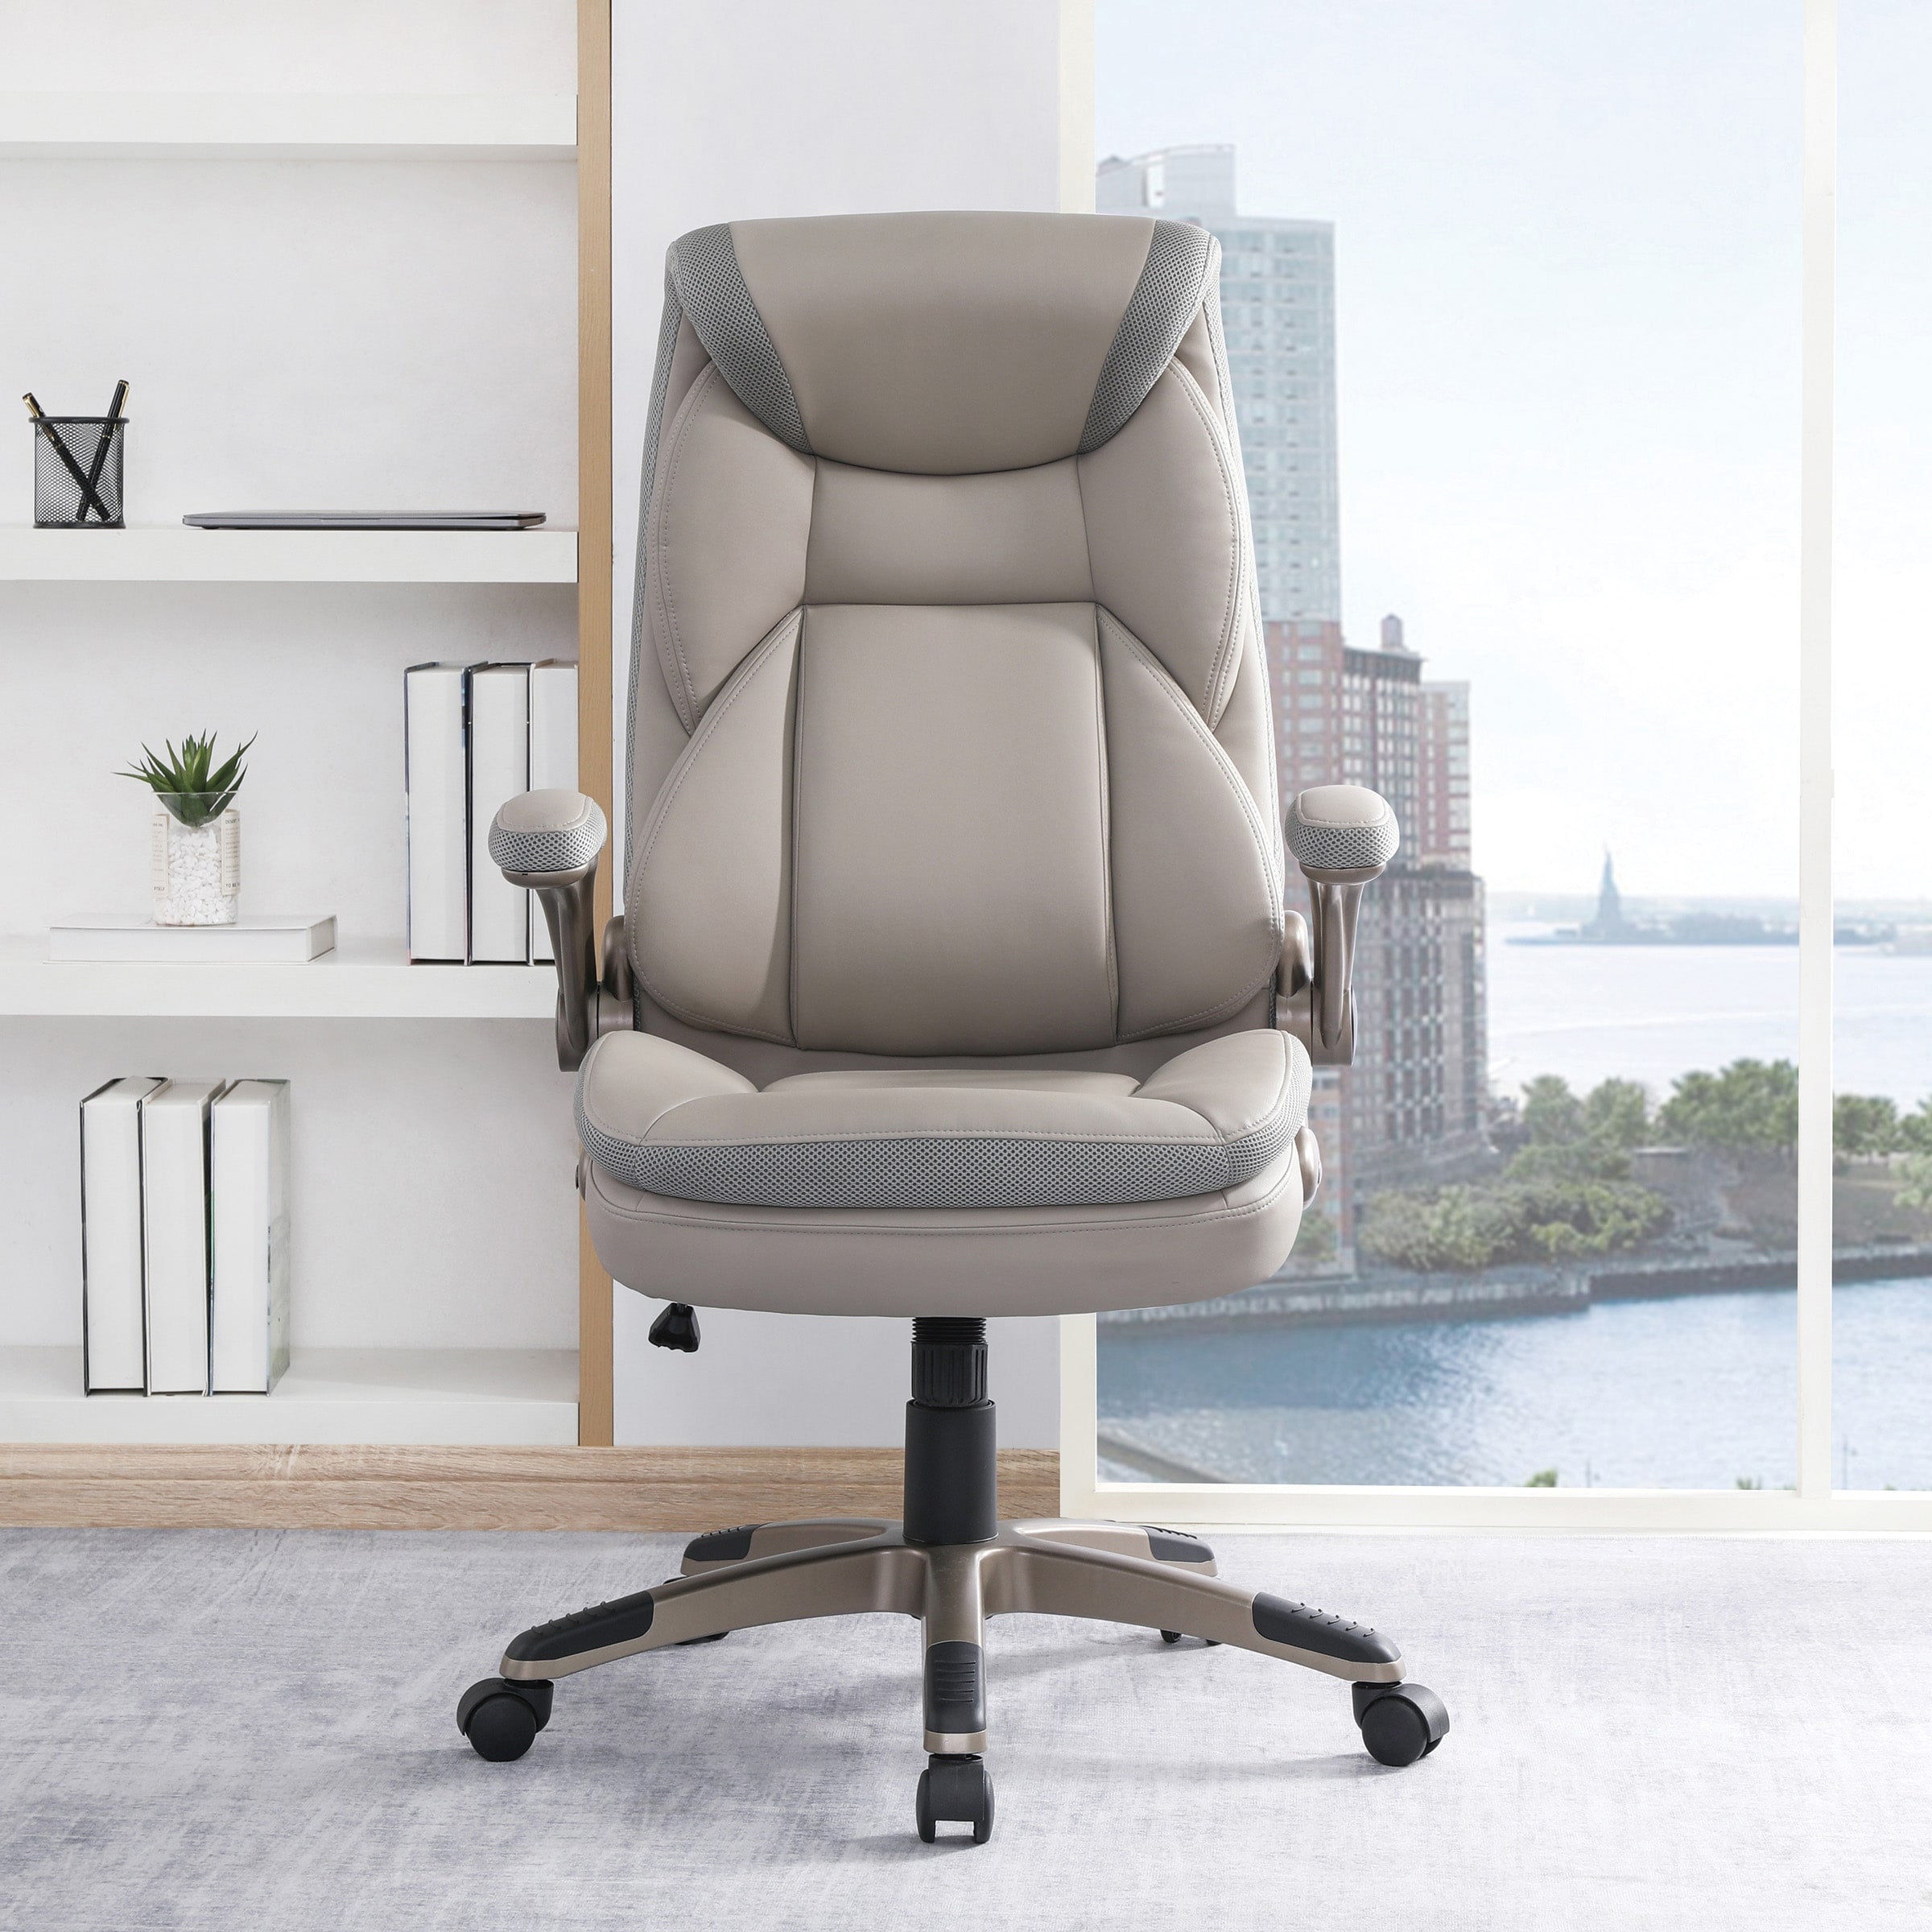 https://ak1.ostkcdn.com/images/products/is/images/direct/629bd9c58b7cc6b84890f7cbb5f7c409ec0e87fc/Executive-Bonded-Leather-Office-Chair.jpg